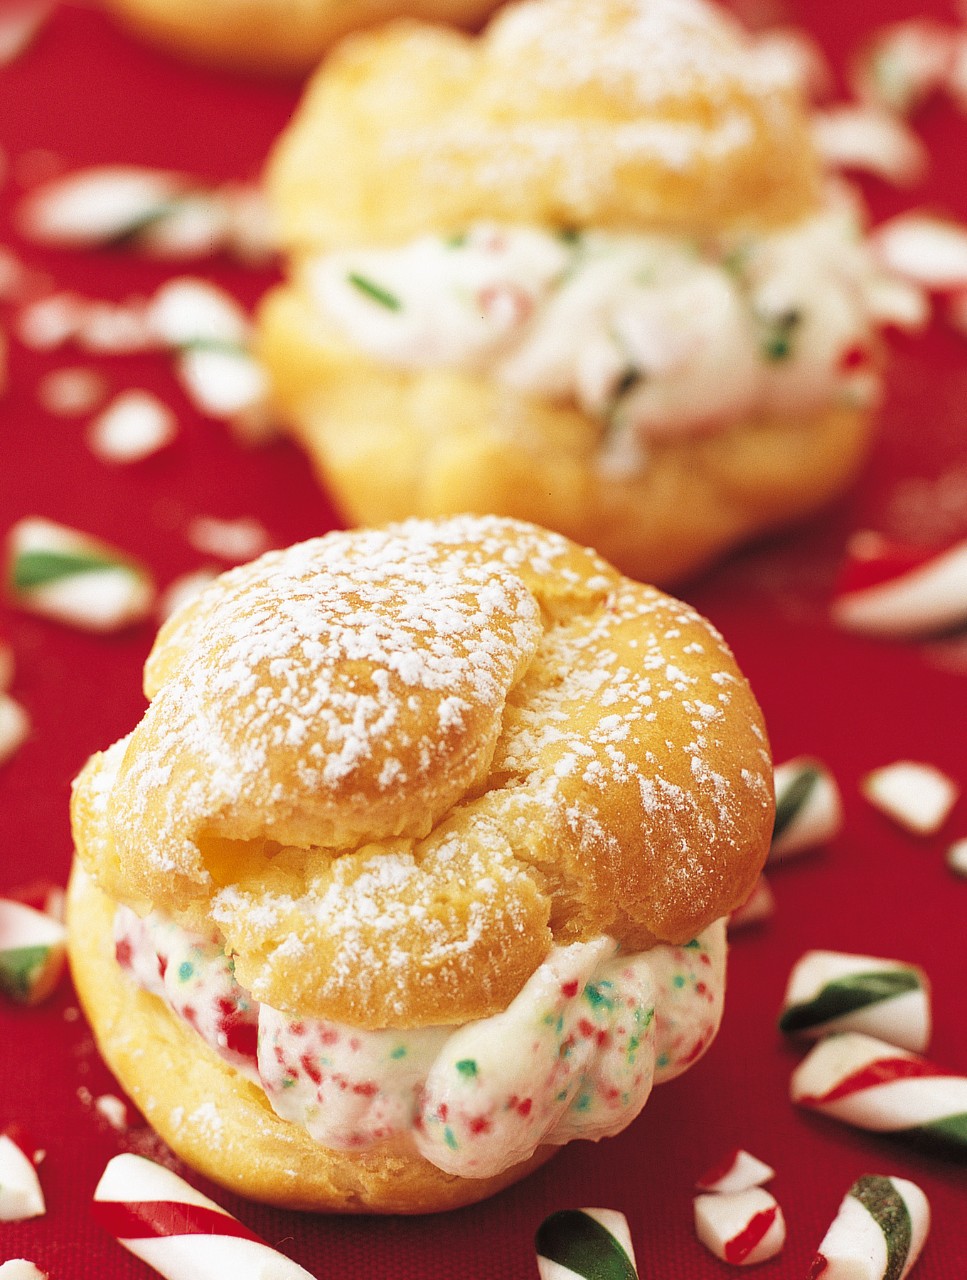 Minty Cream Puffs with Mascarpone and Candy Cane Filling